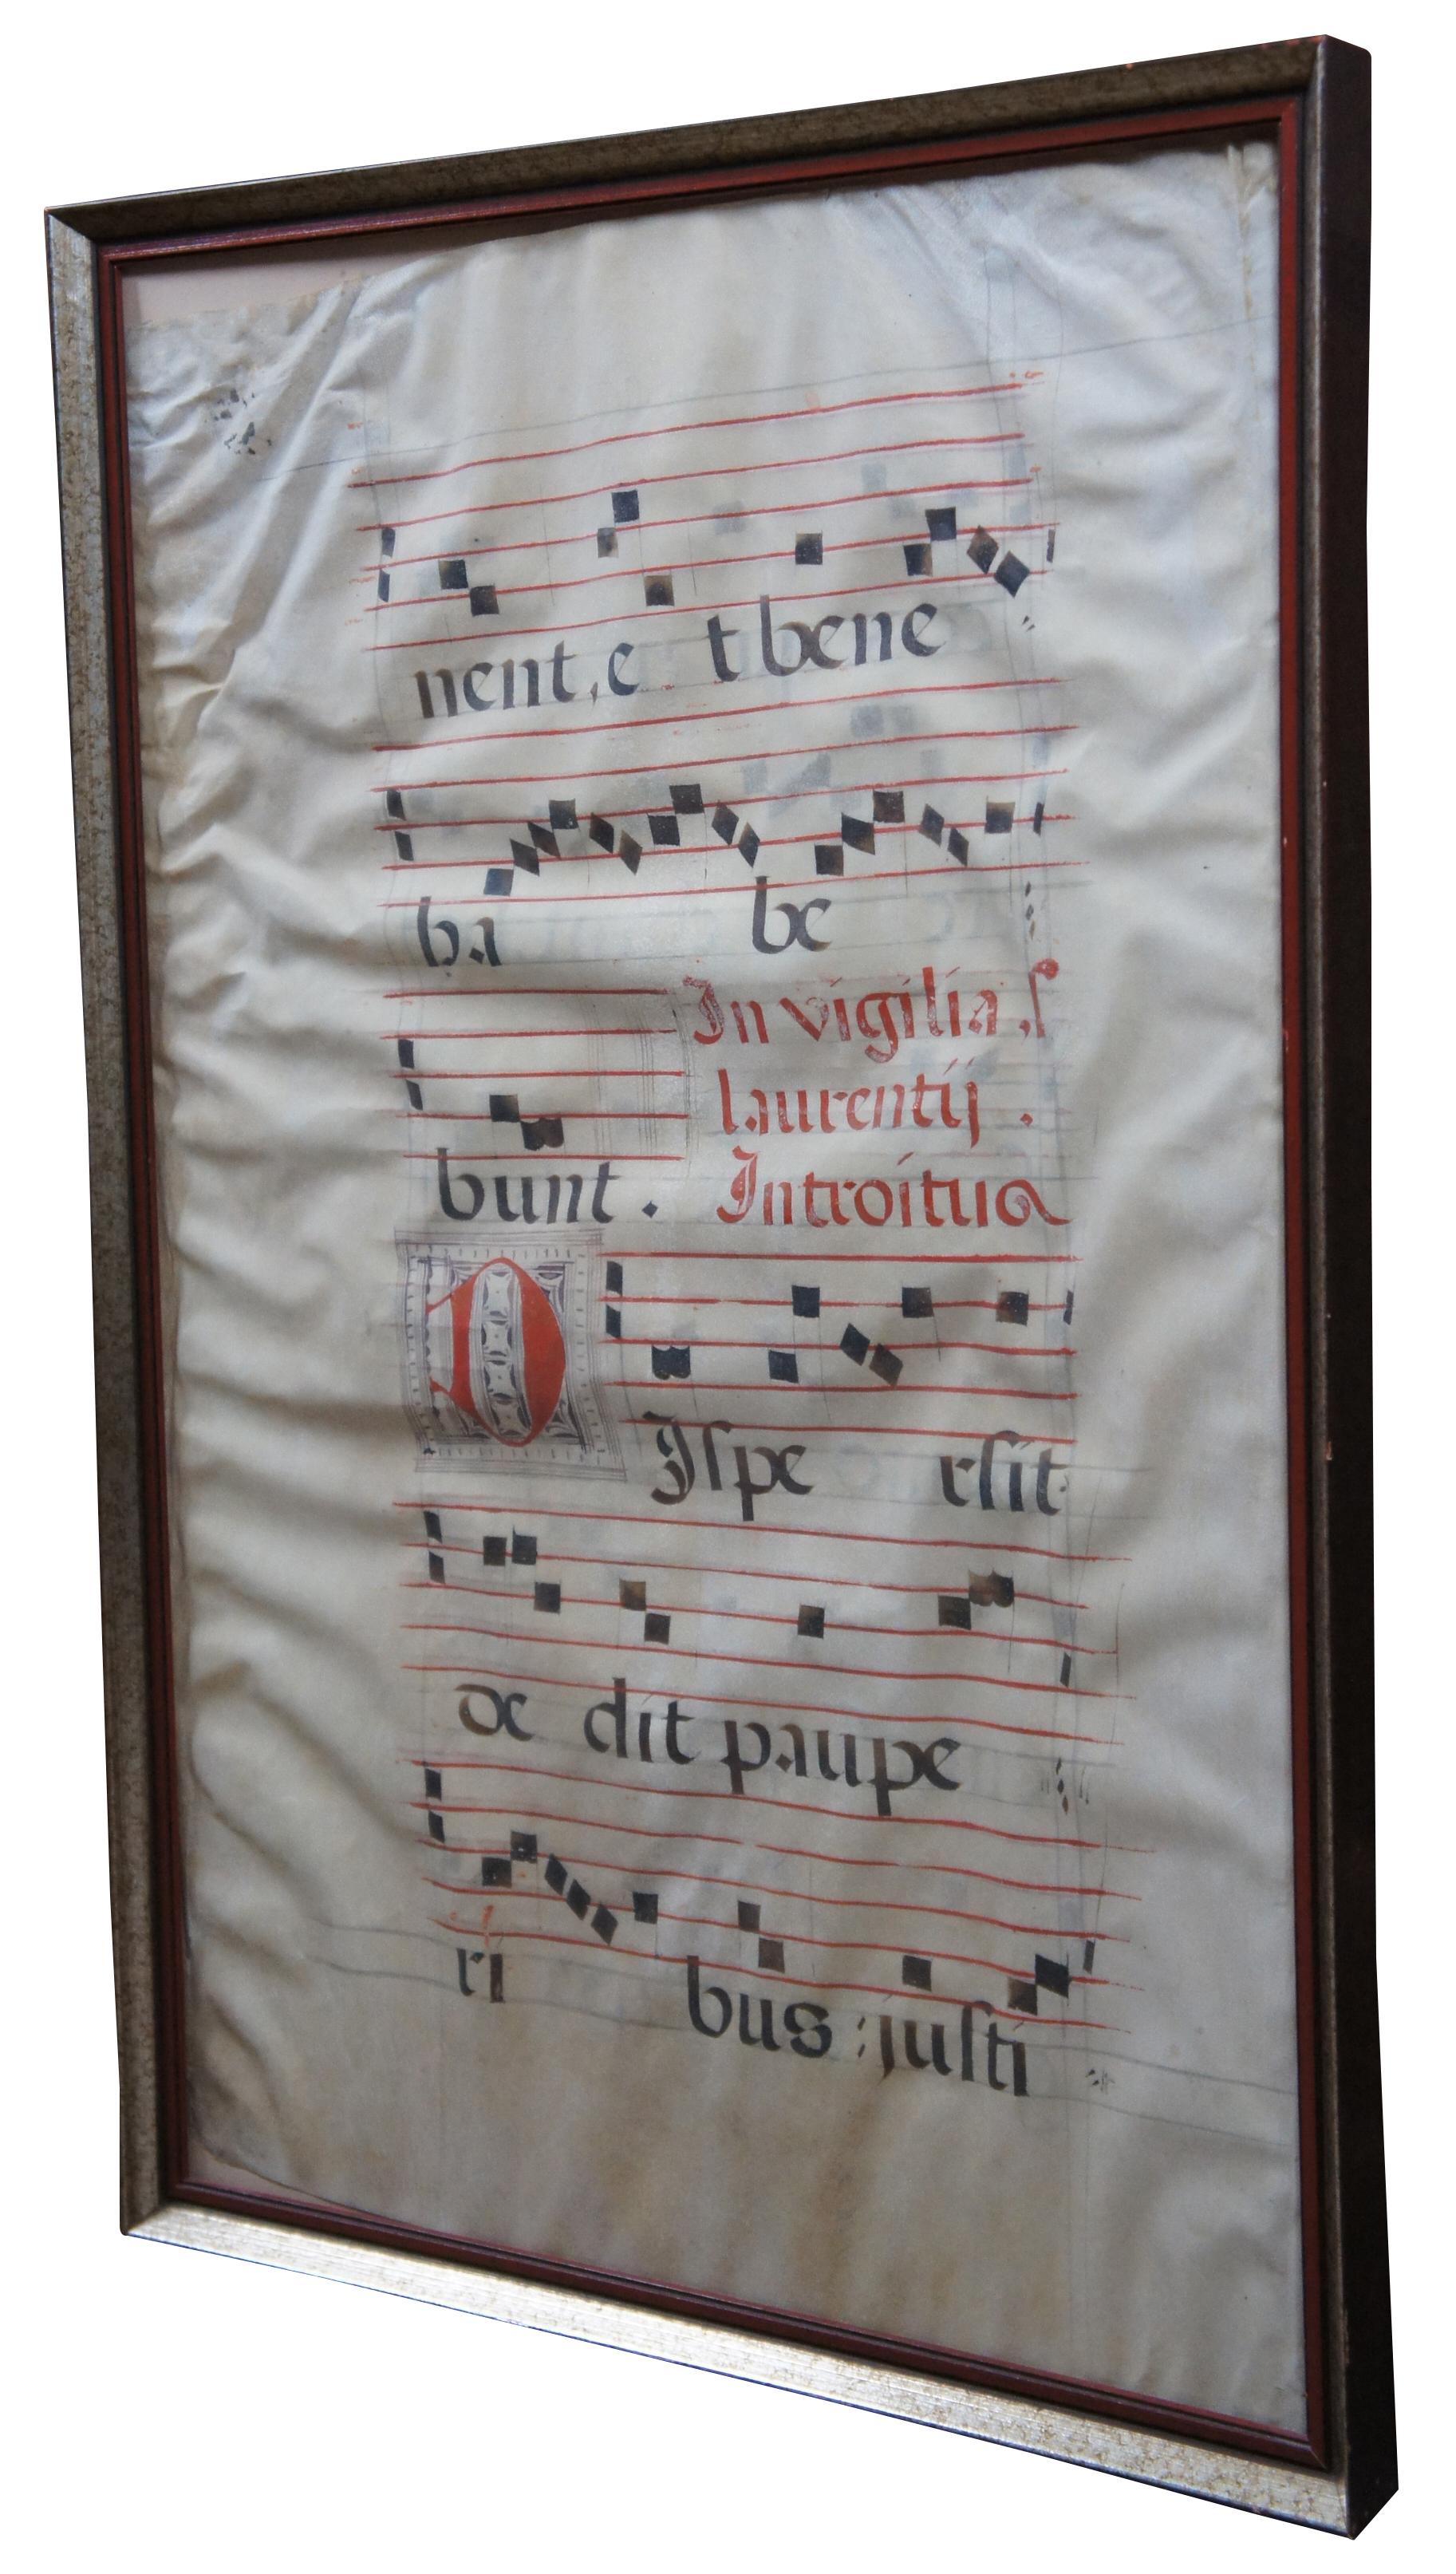 Framed 17th century Roman Catholic sheet music hand written in Latin on vellum in red and black ink.

Measures: Sans frame 18” x 27.625”.